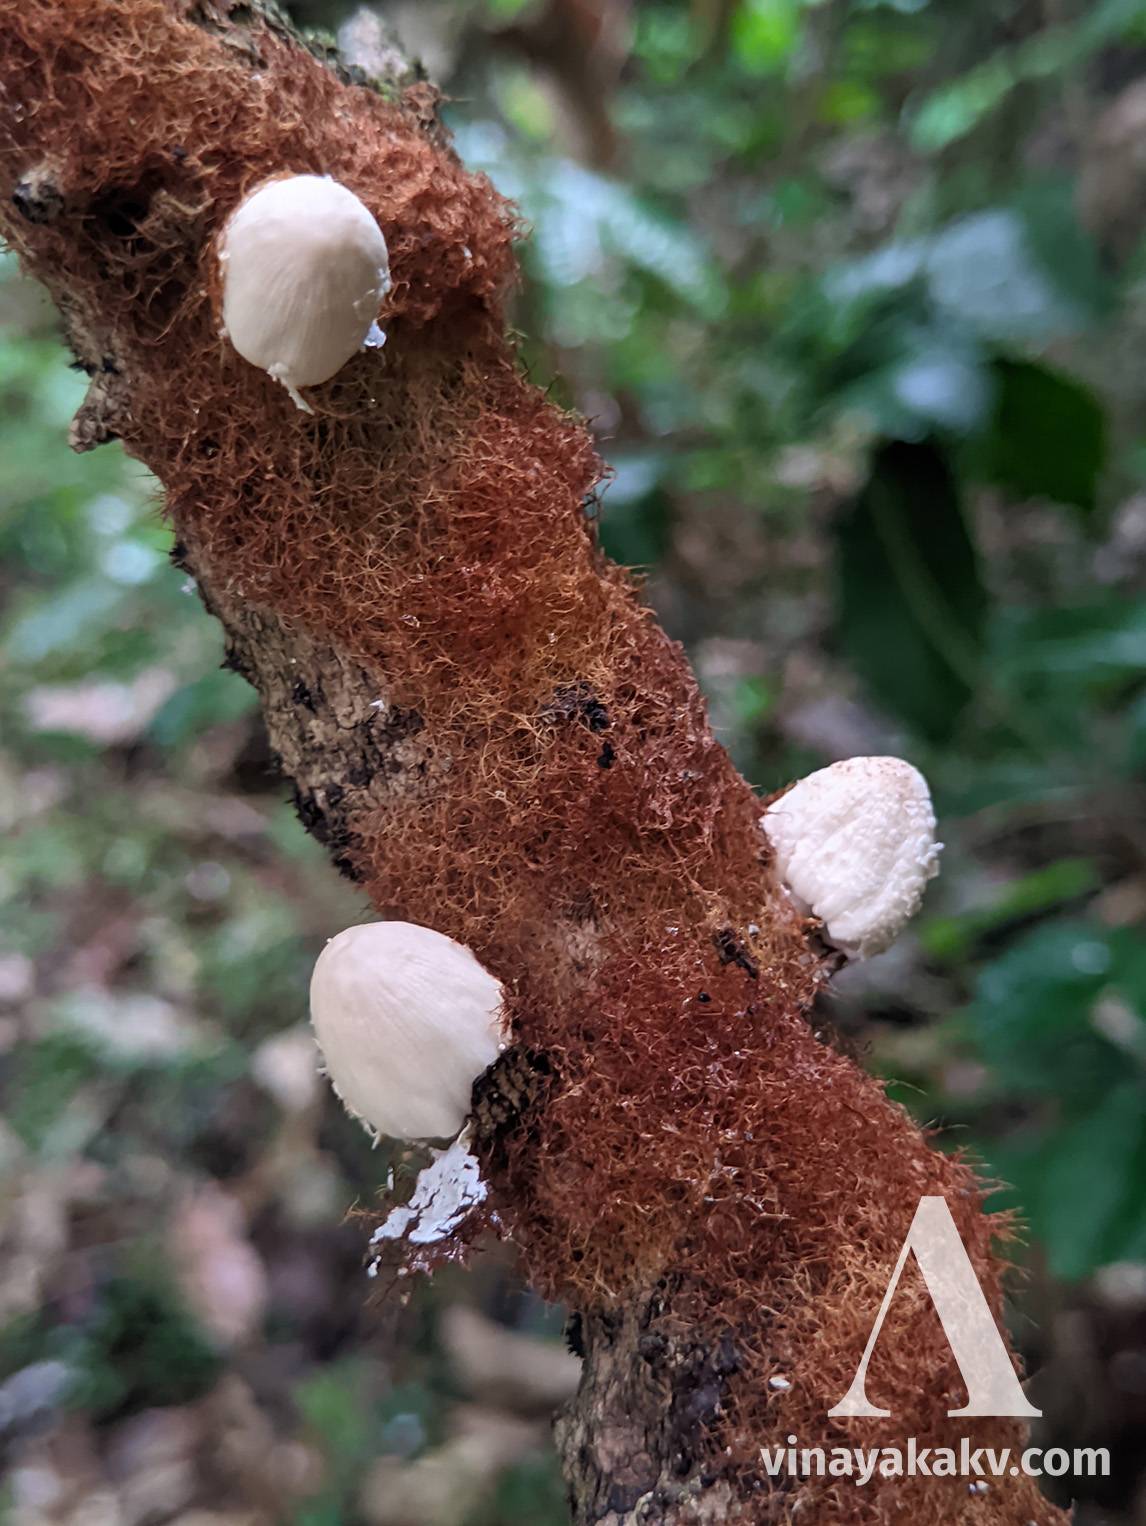 Small fungi on a moss-covered tree branch